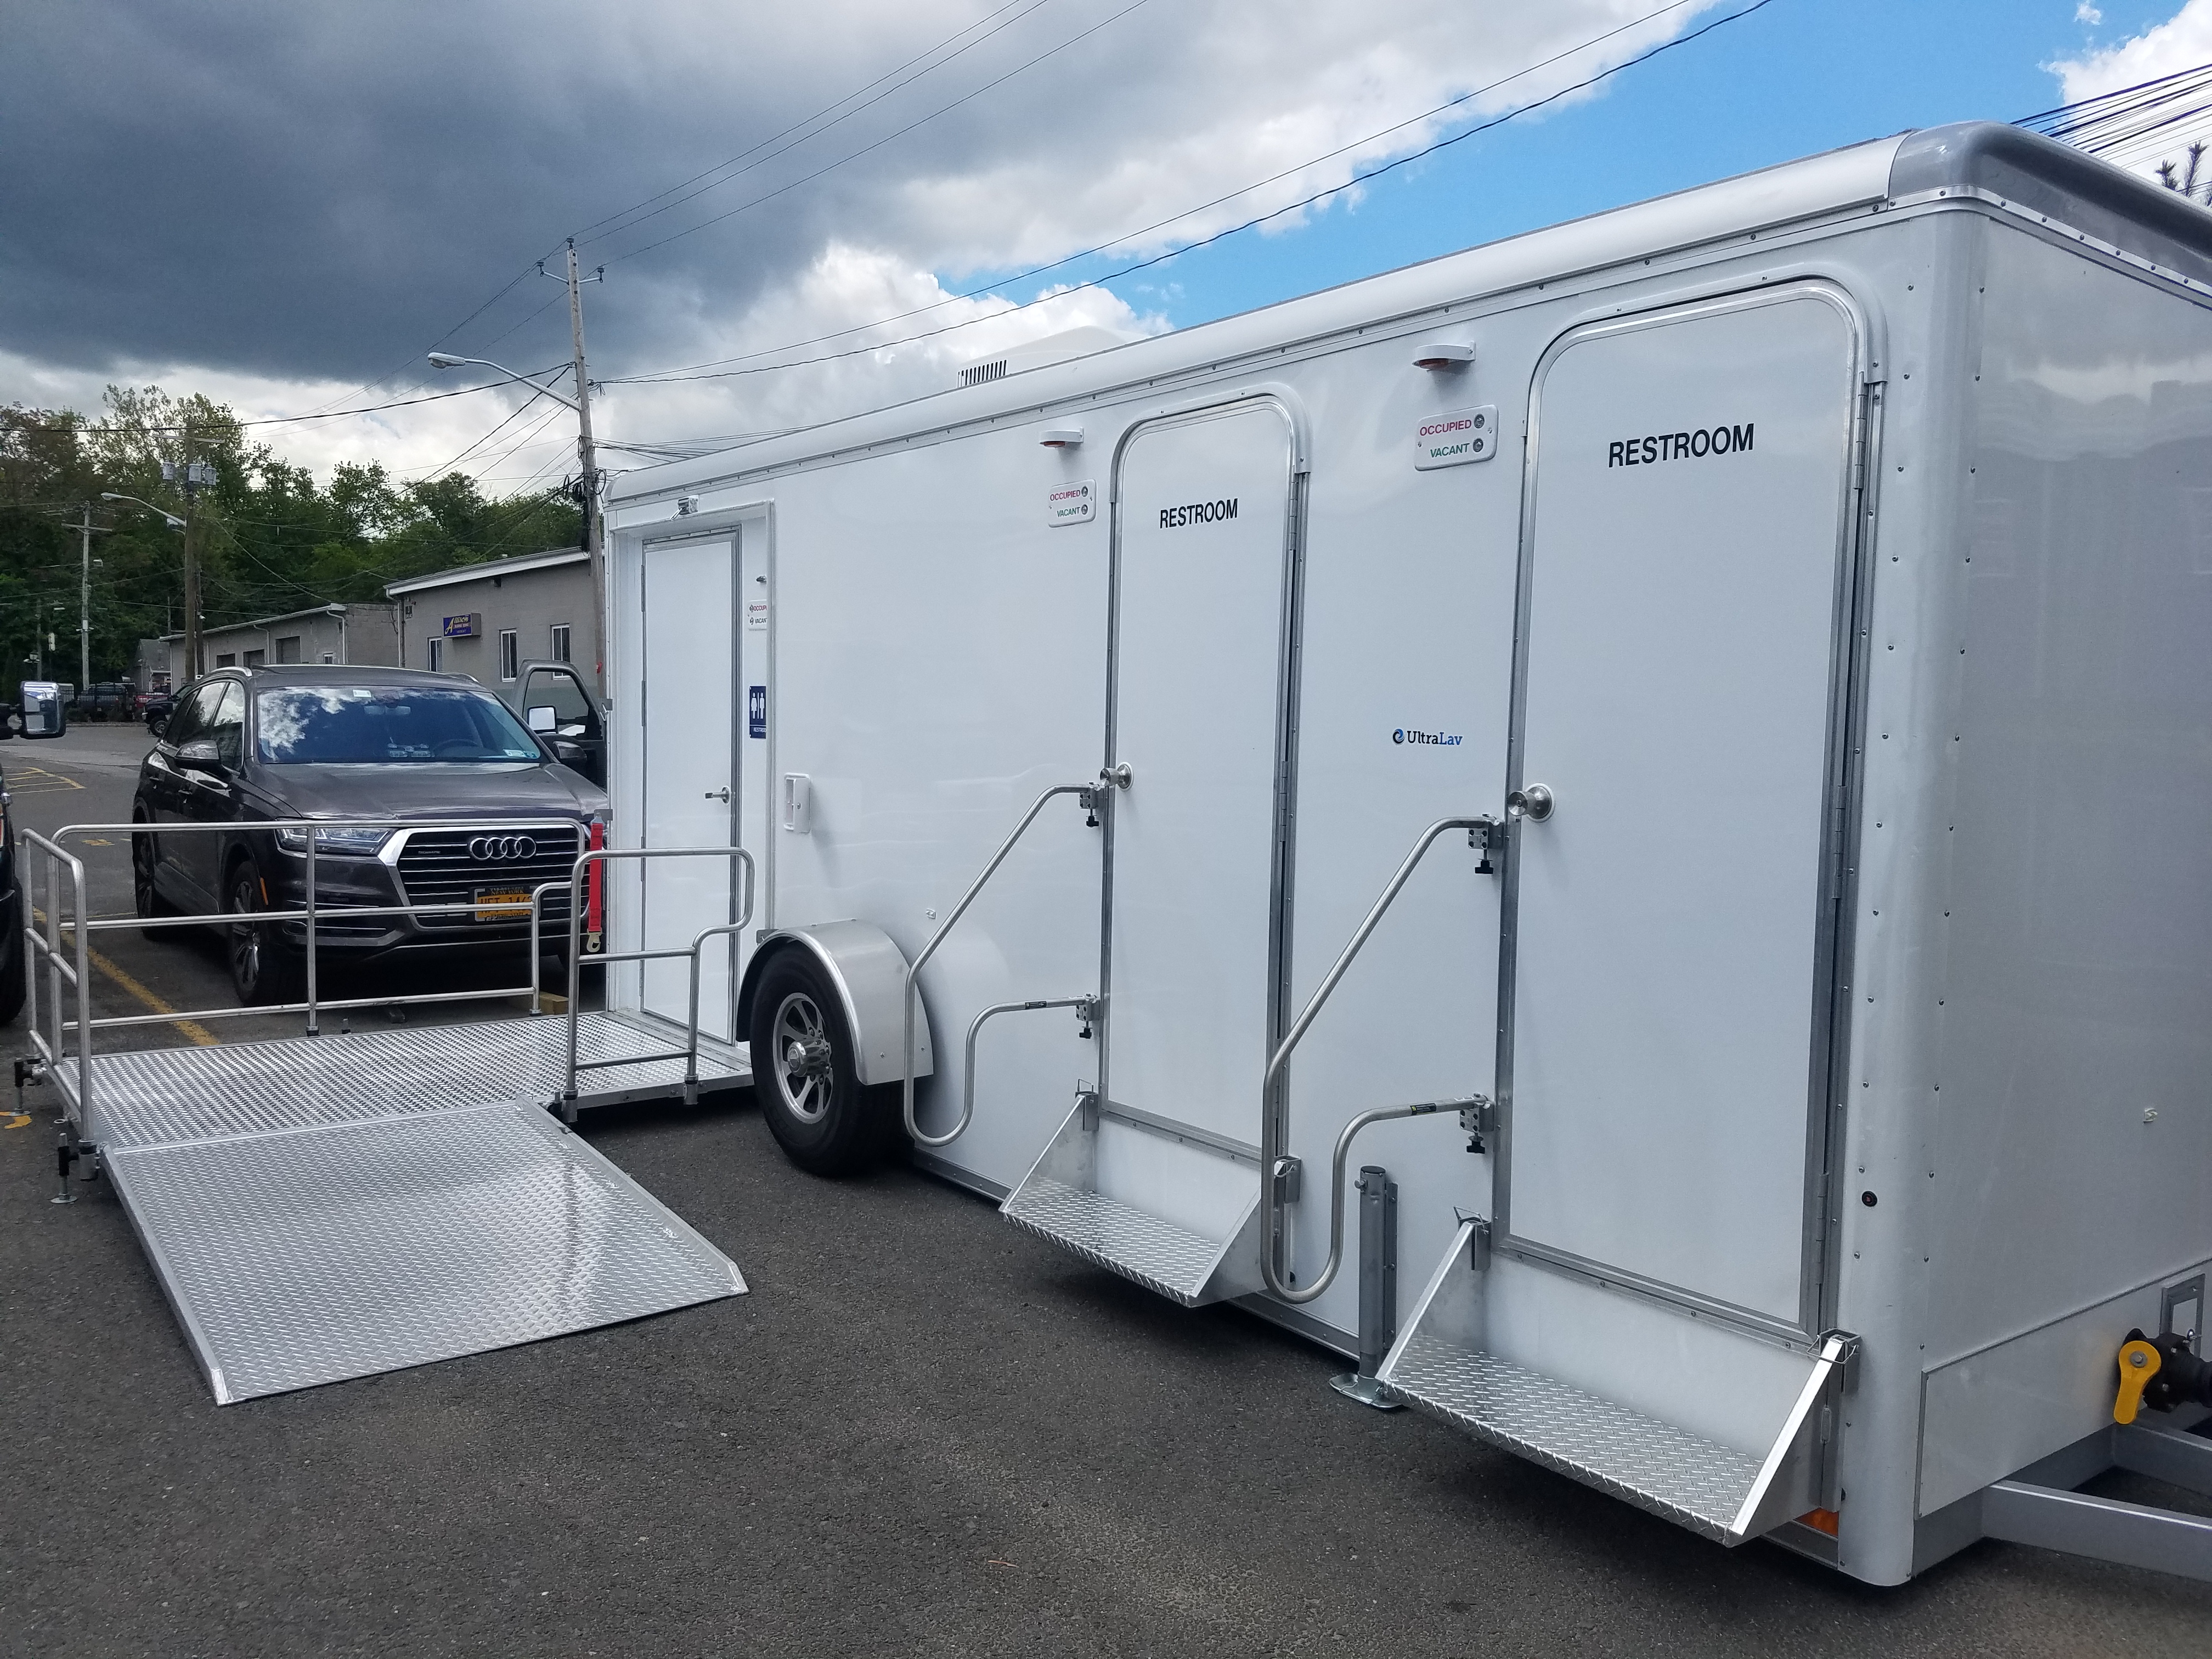 ADA Plus Two Station Vegas Restroom Trailer, Being Set Up for an Event, in Haverstraw NY 